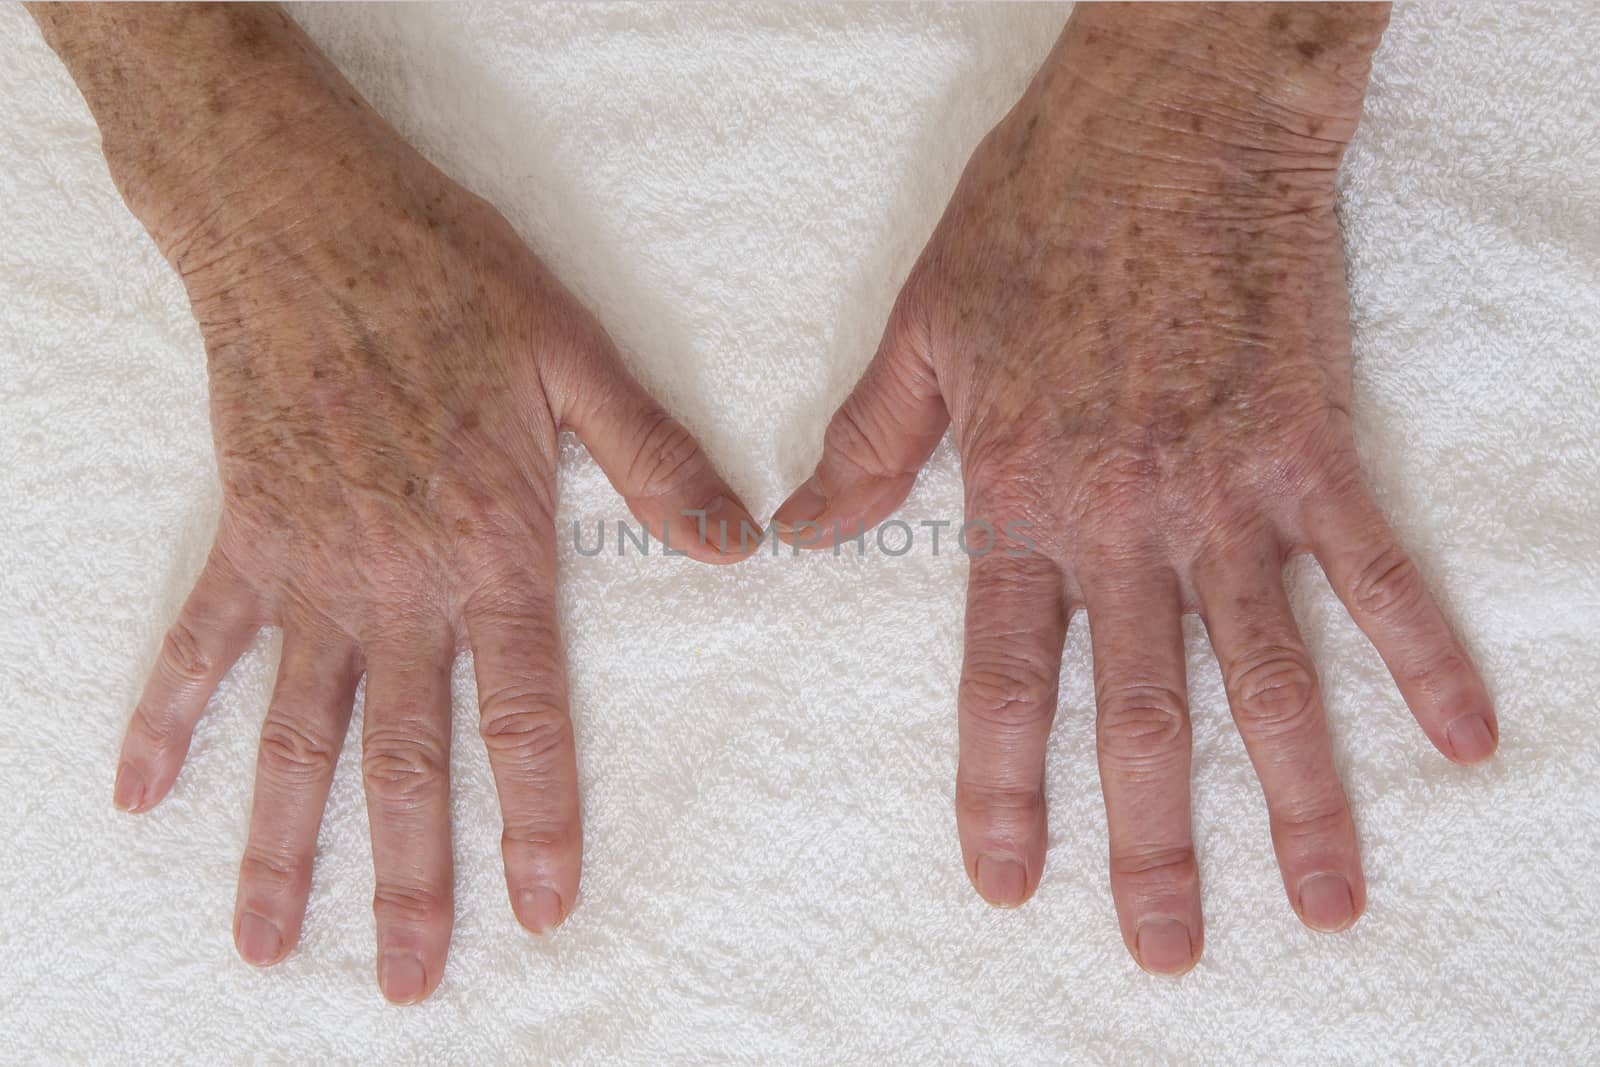 old stain on the skin- Skin disease on hands by JPC-PROD